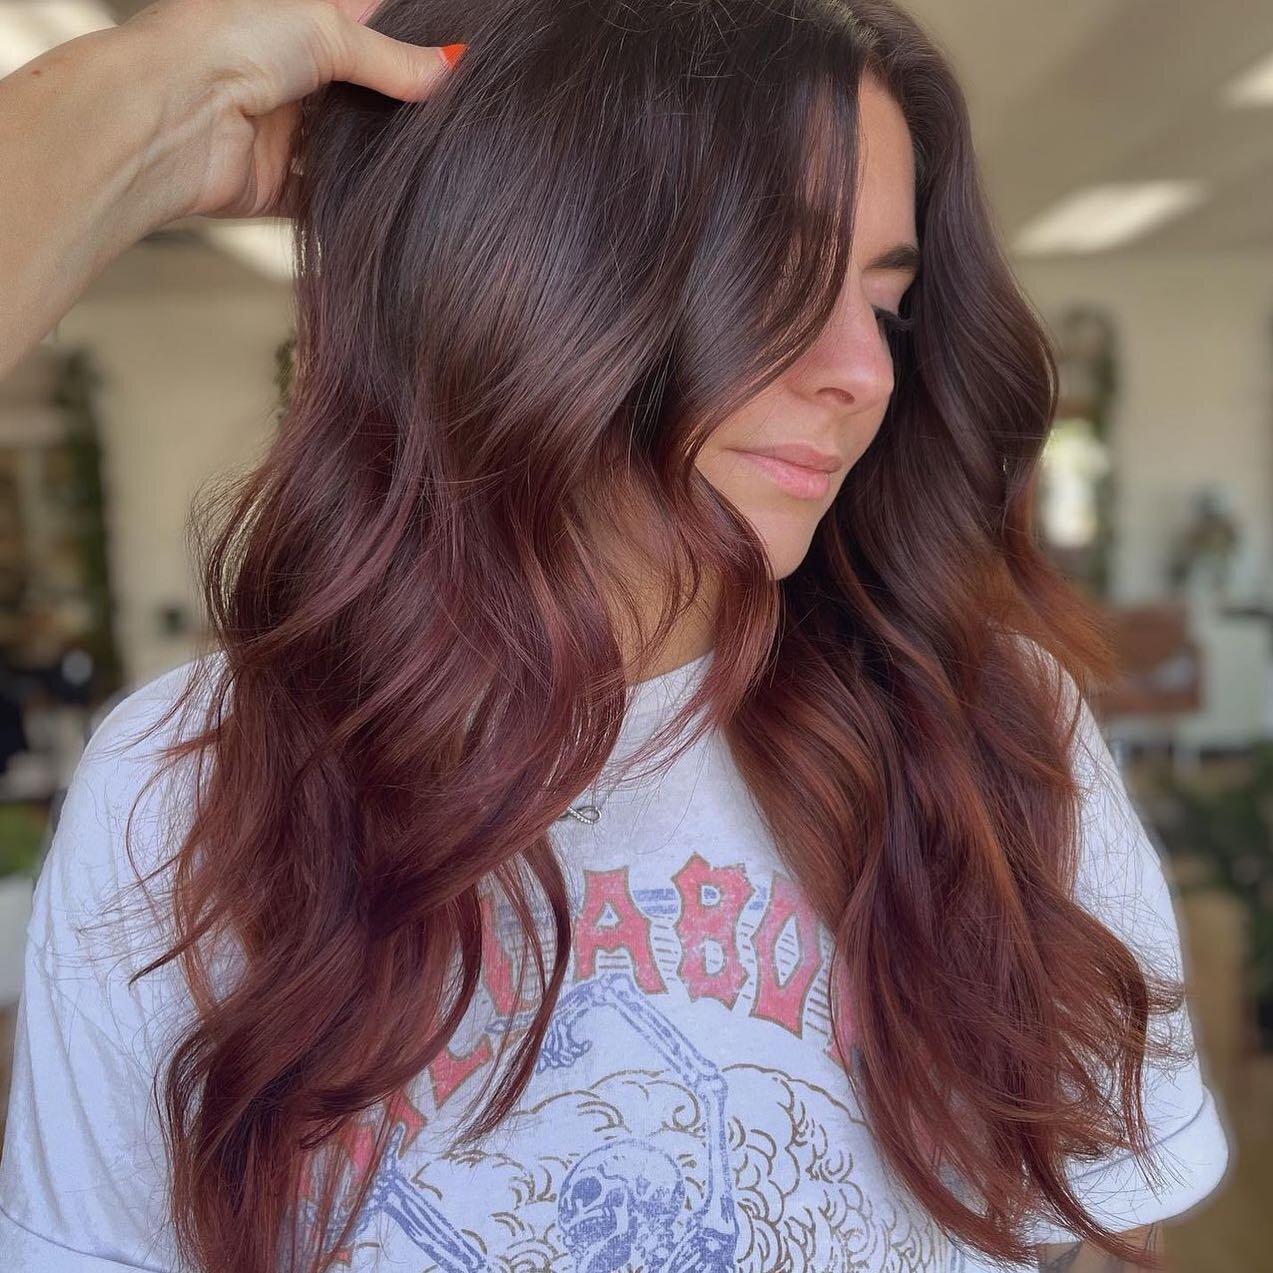 Have you booked your summer appointment at CITIZEN yet? ☀️ 

Head to the link in our bio to book with one of our talented stylists!

Hair by @ajshair_